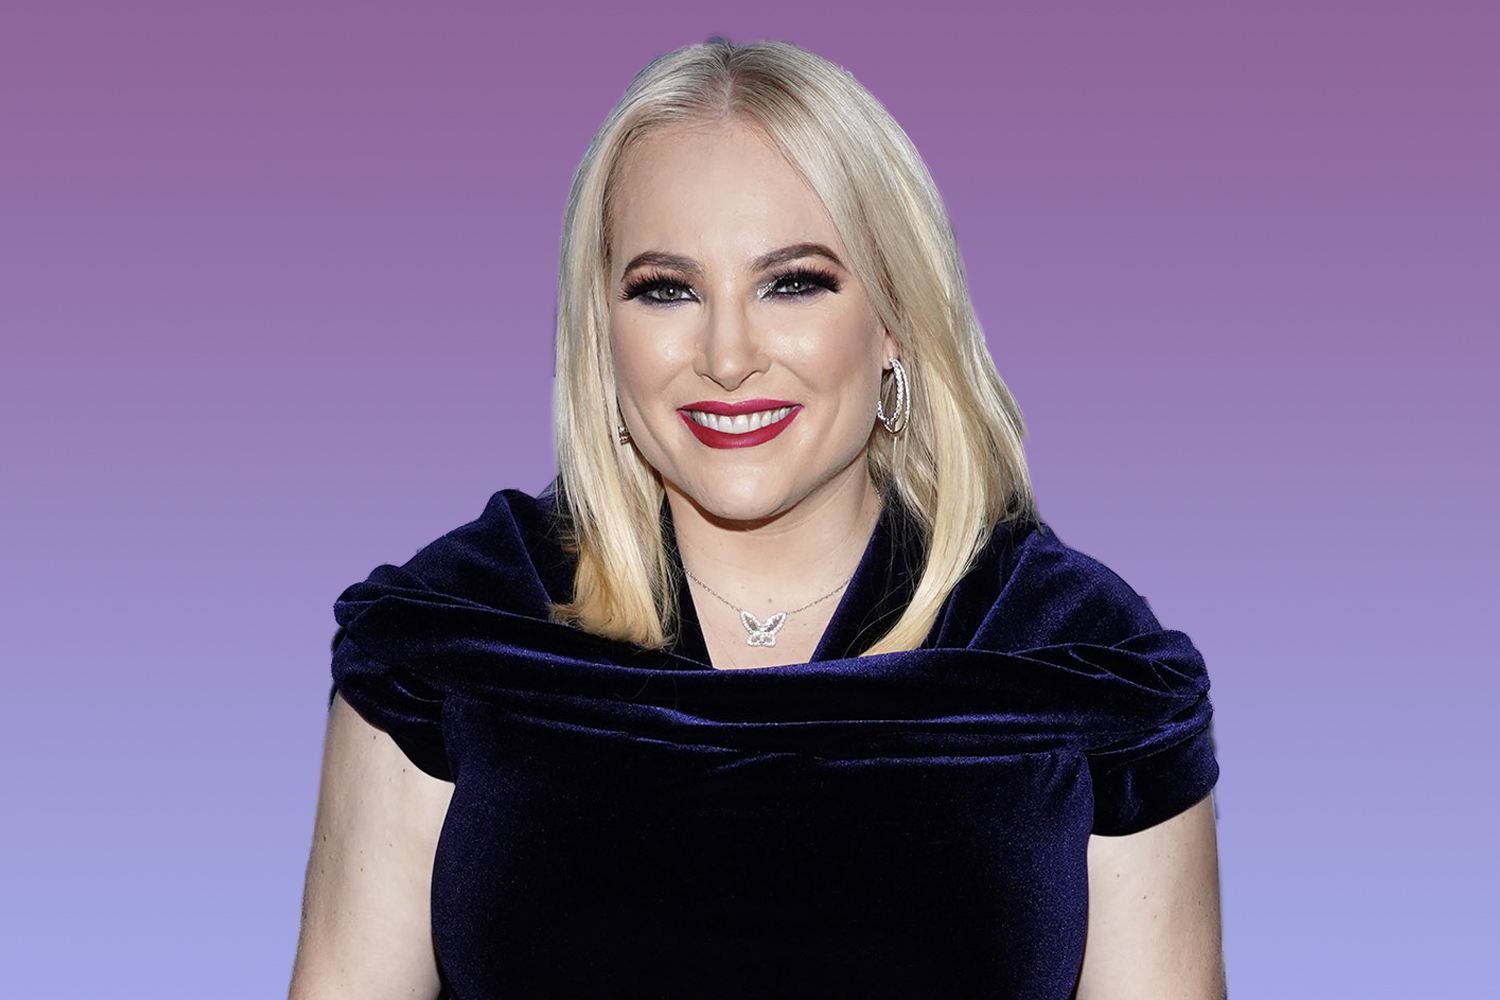 Meghan McCain Shares Photo of Her Daughter Liberty and Fans Are Obsessed With Her Cuteness